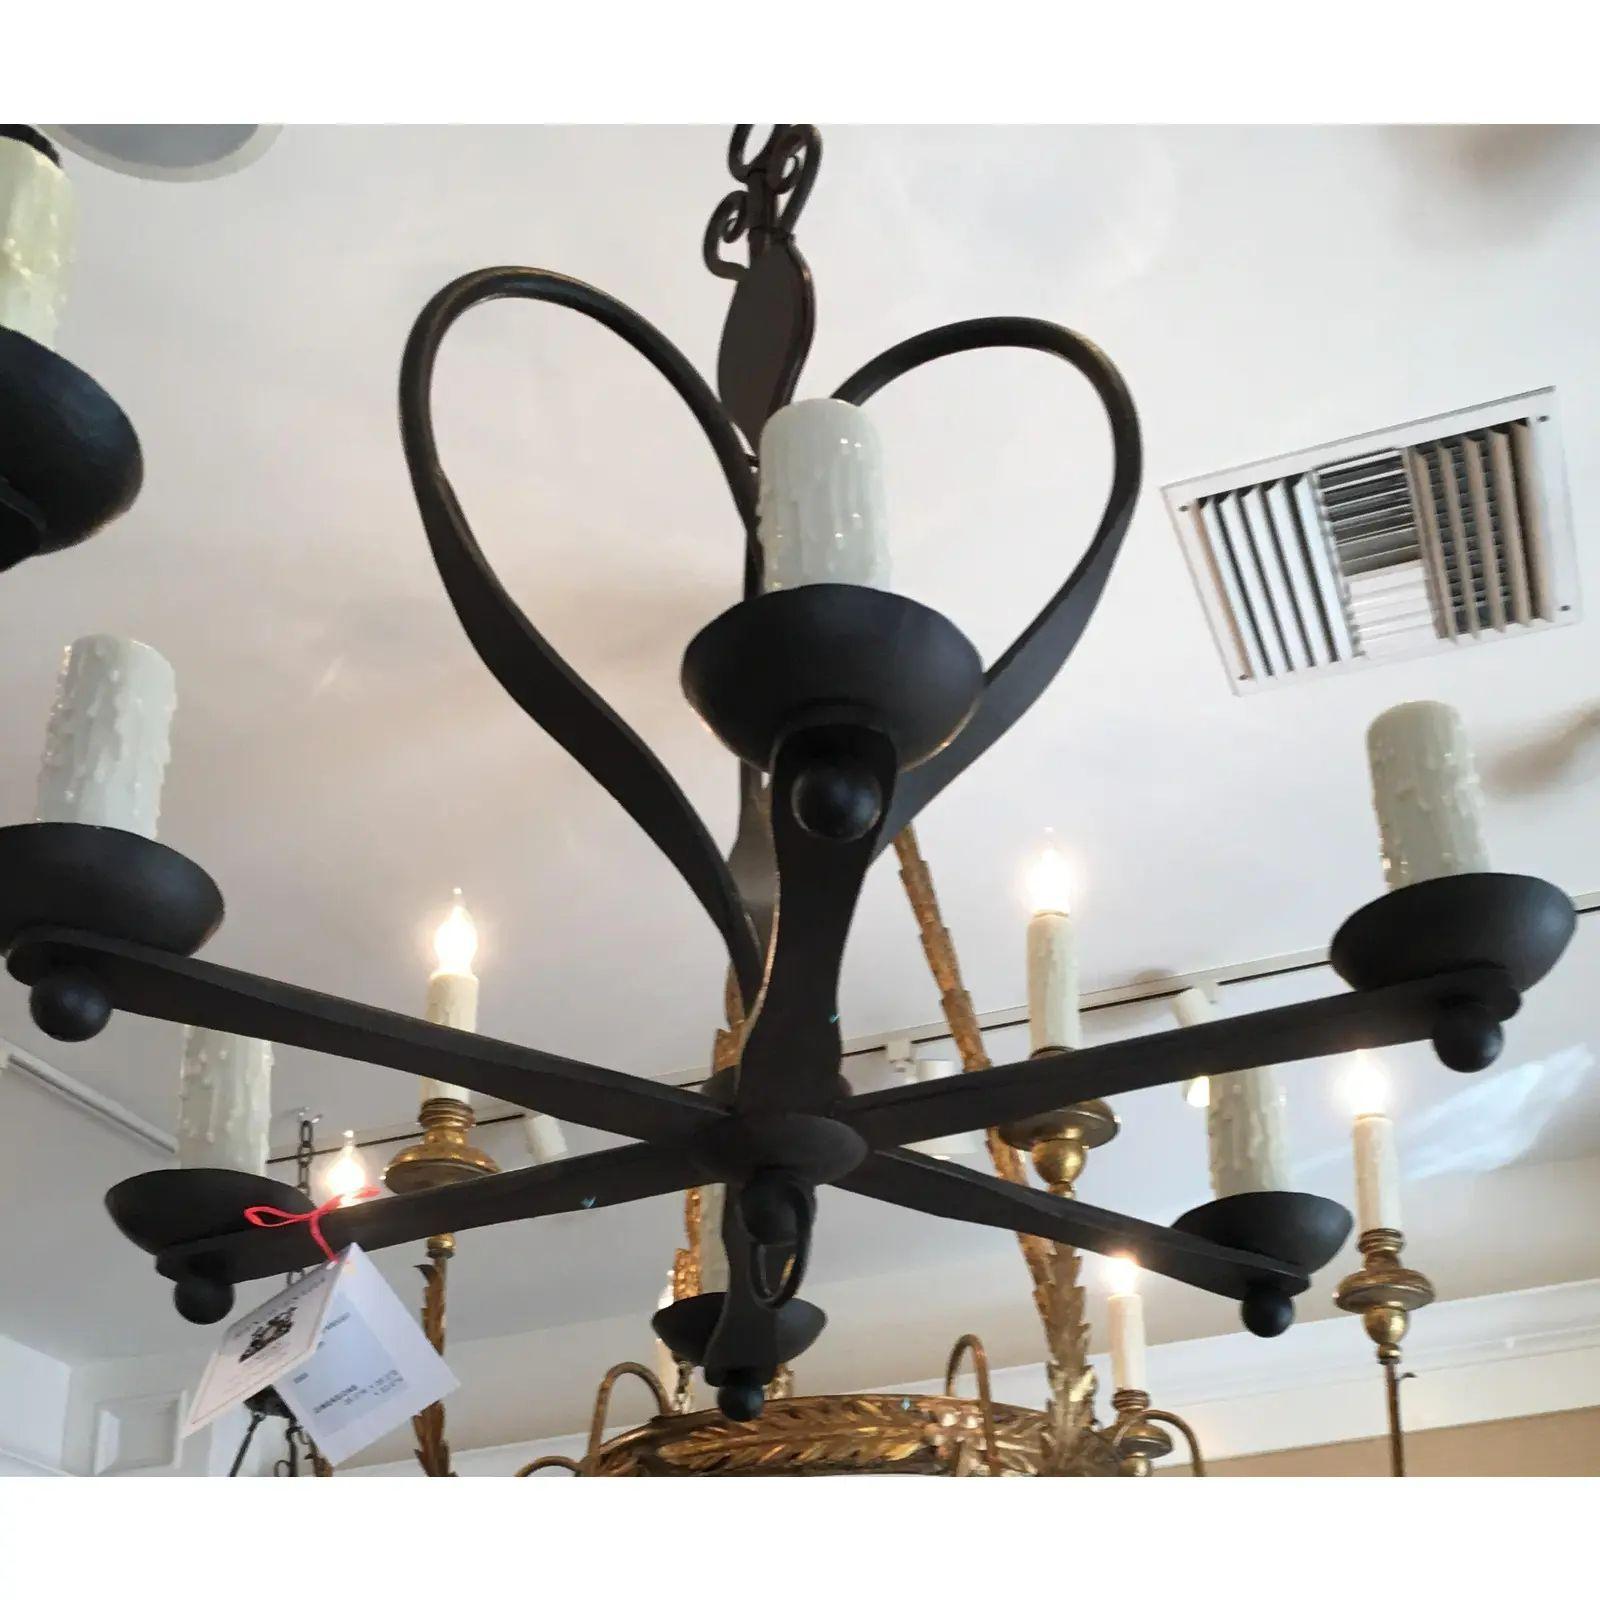 Rustic Italian 6 Arm Wrought Iron Chandelier by Randy Esada Designs for Prospr For Sale